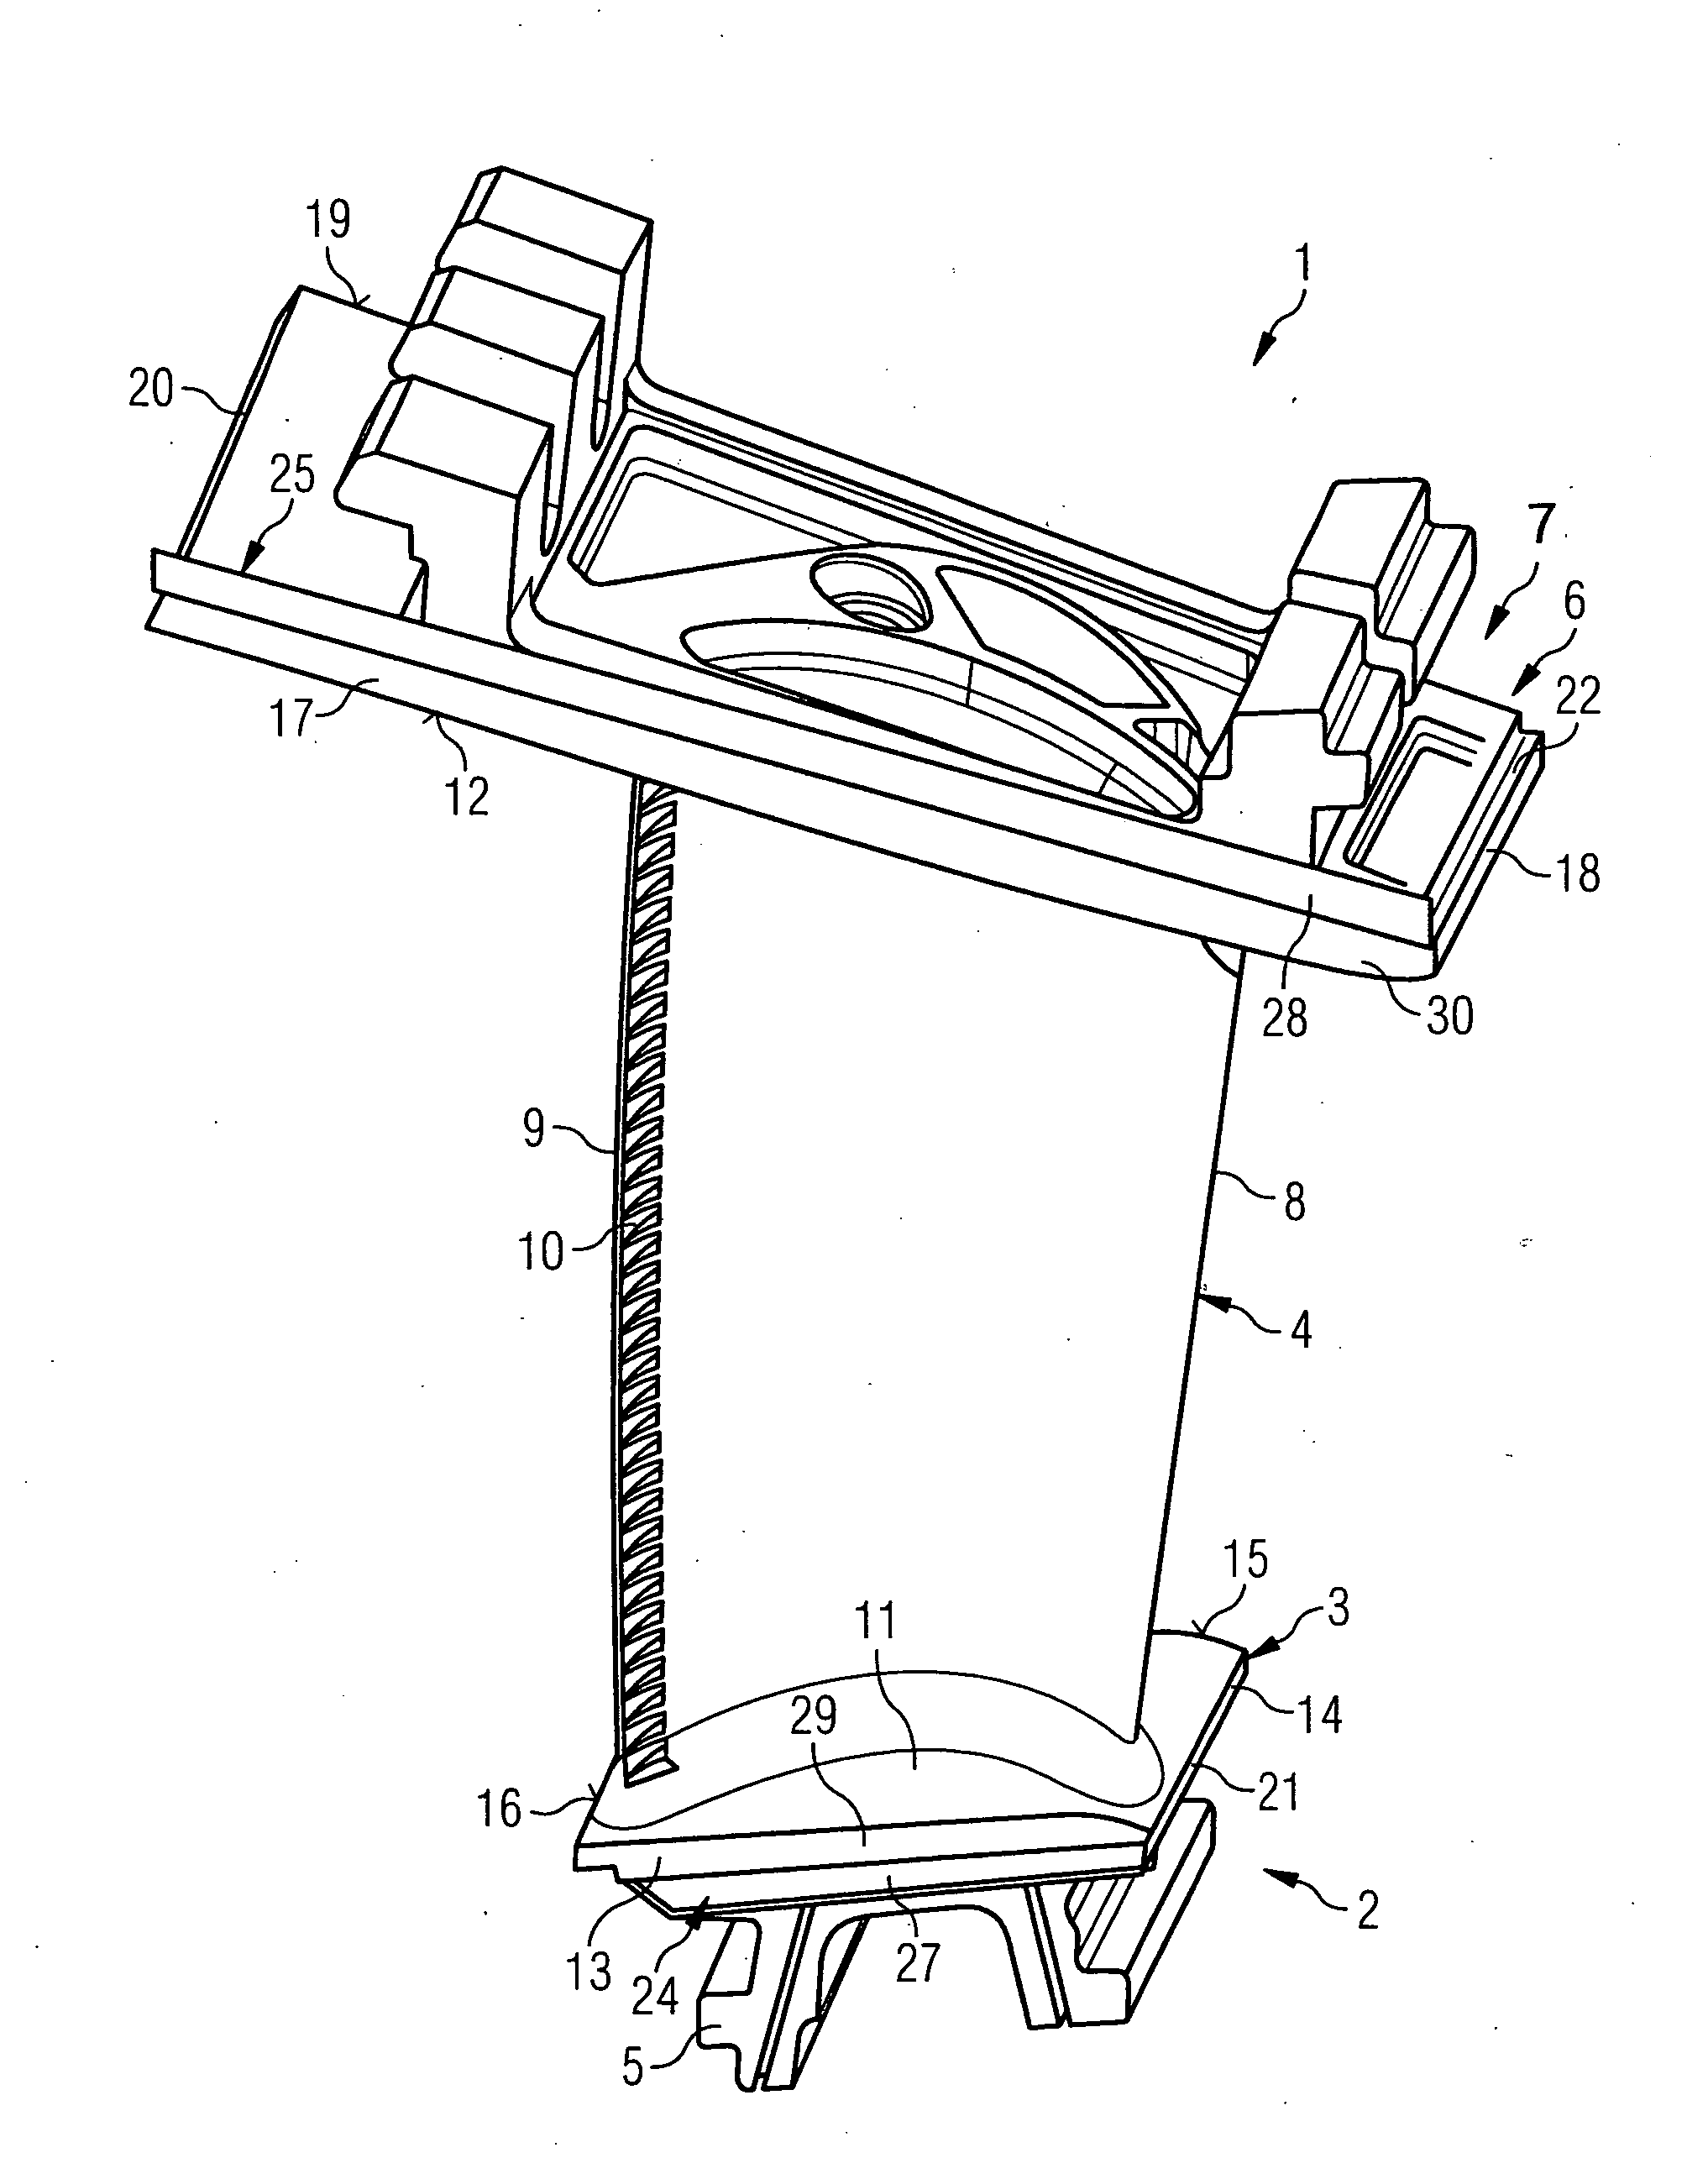 Process for preparing turbine blades or vanes for a subsequent treatment, and associated turbine blade or vane